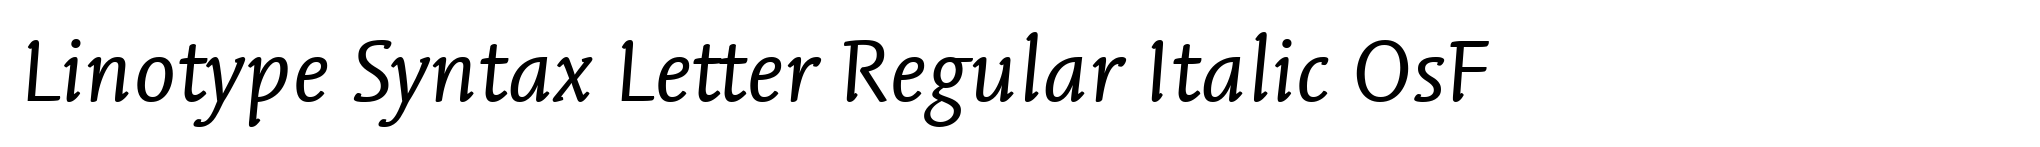 Linotype Syntax Letter Regular Italic OsF image